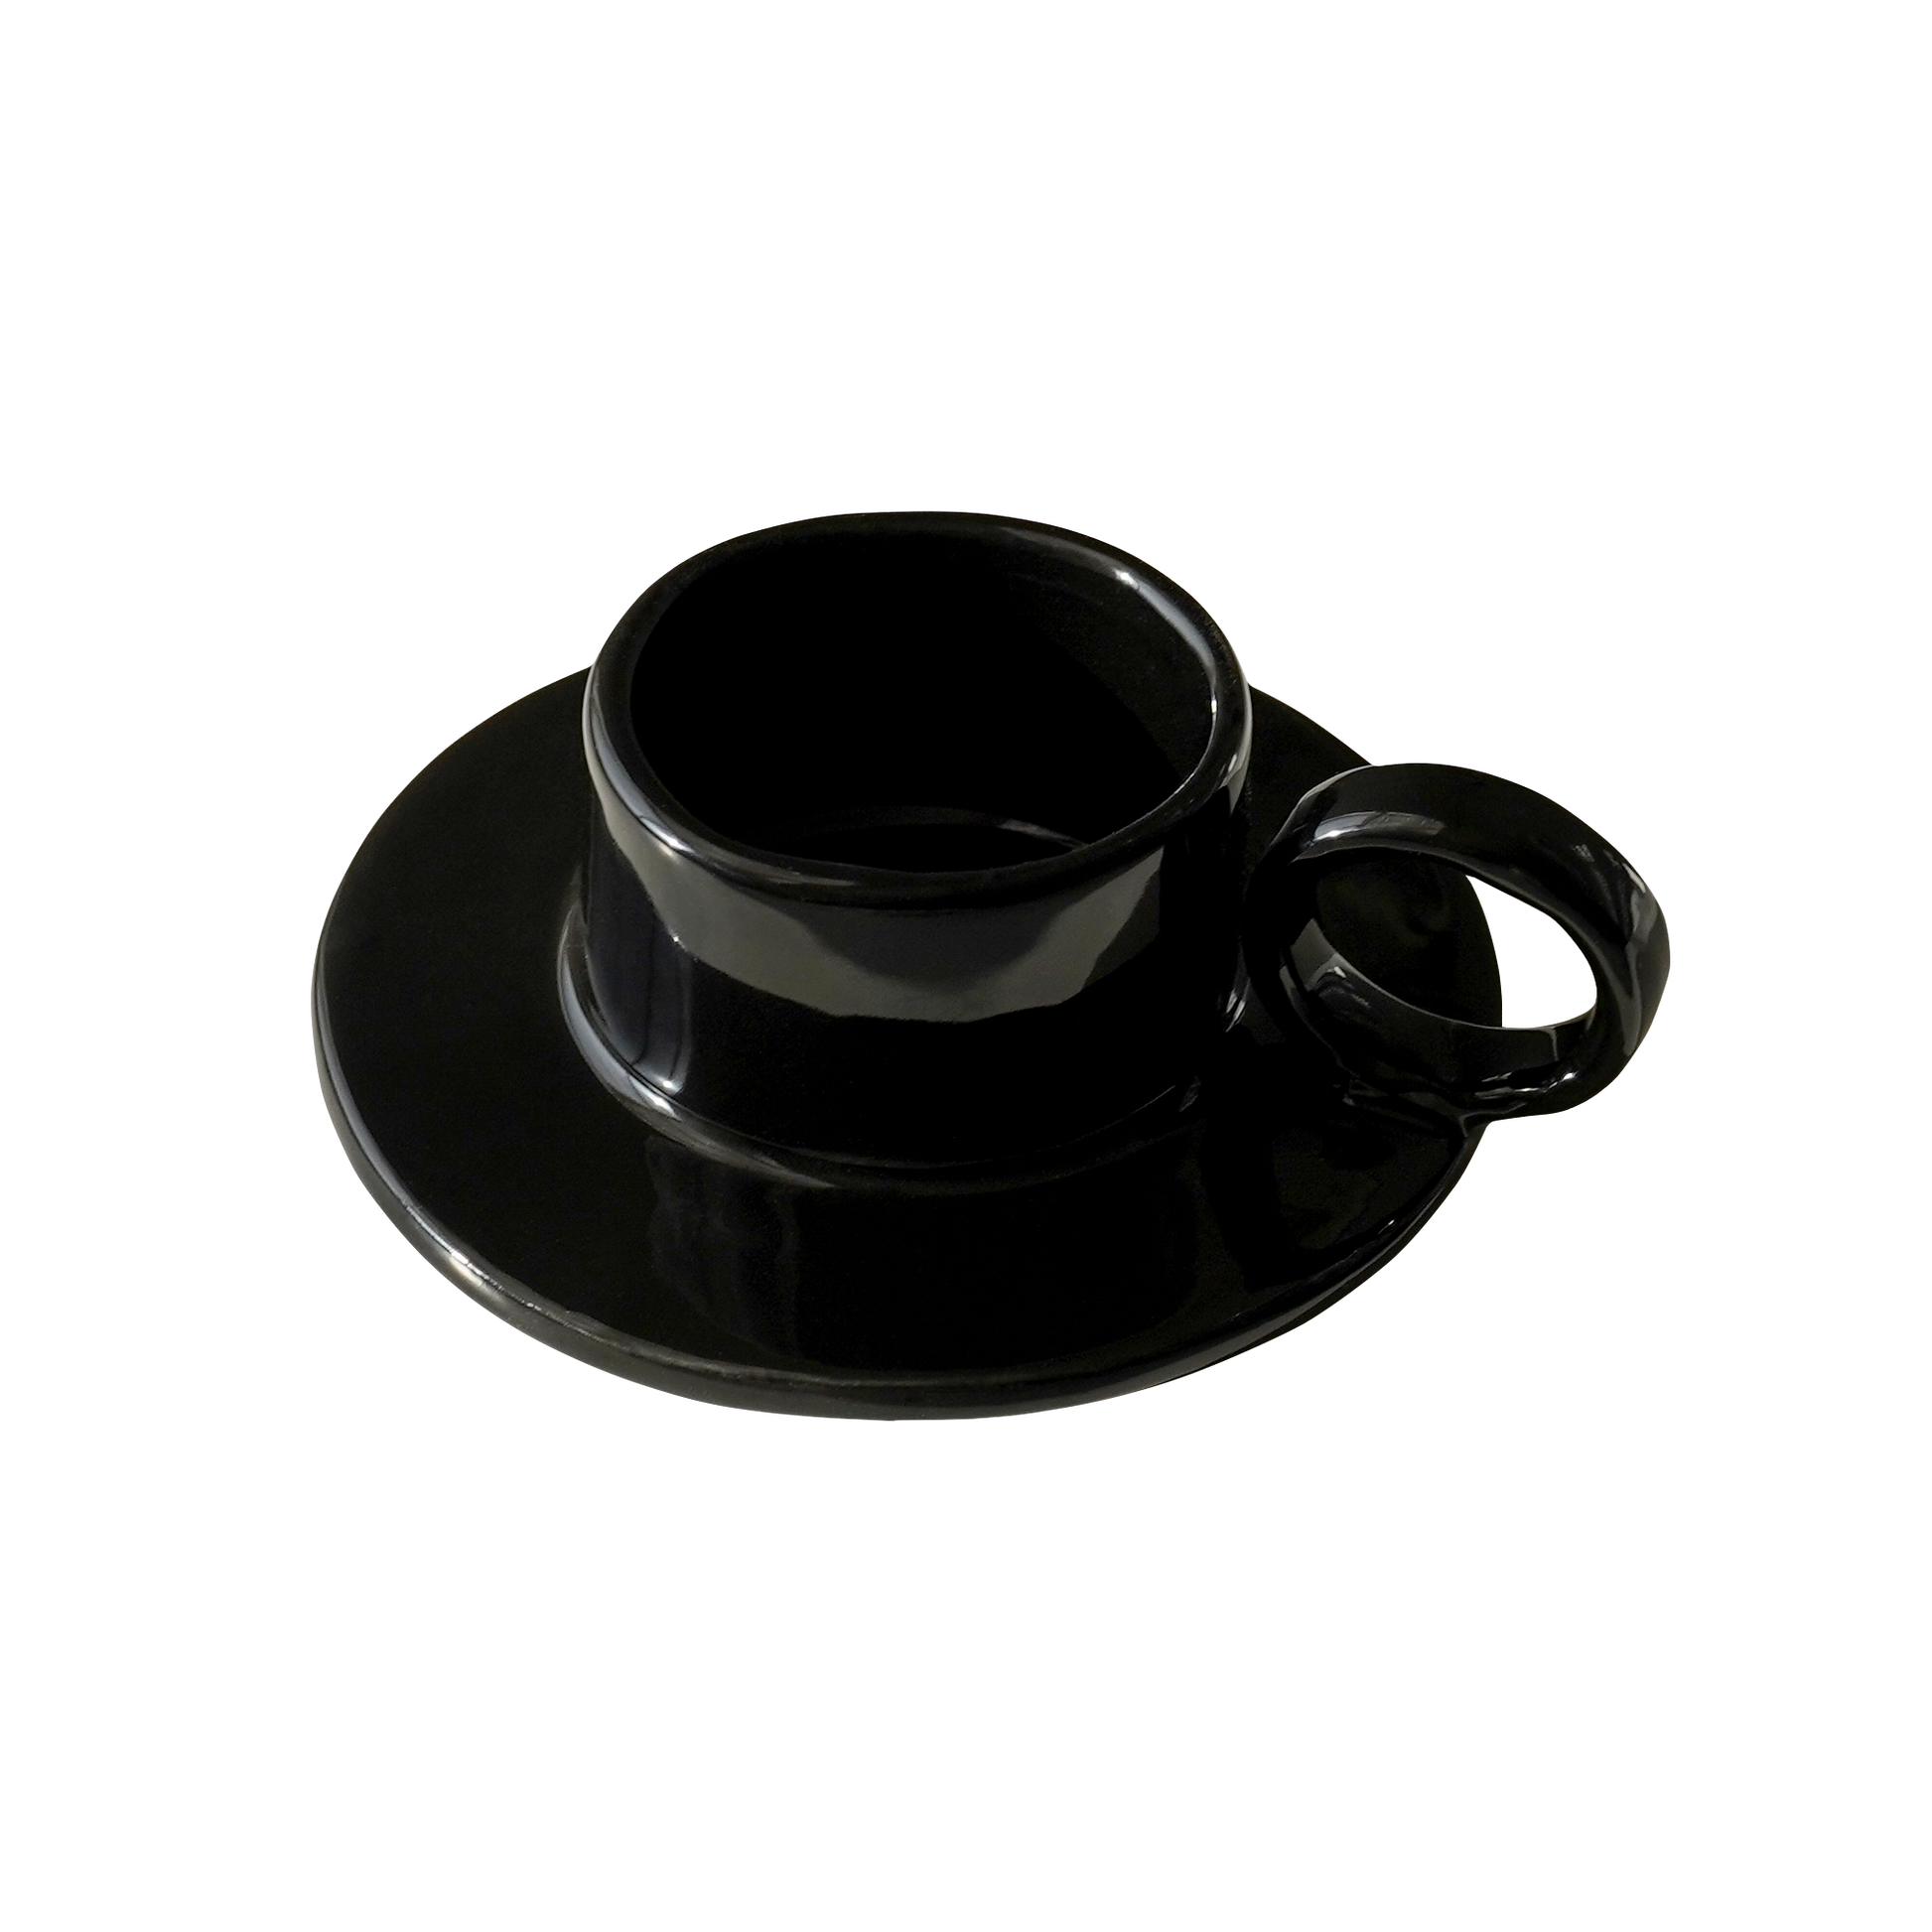 piano black teacup candle holder